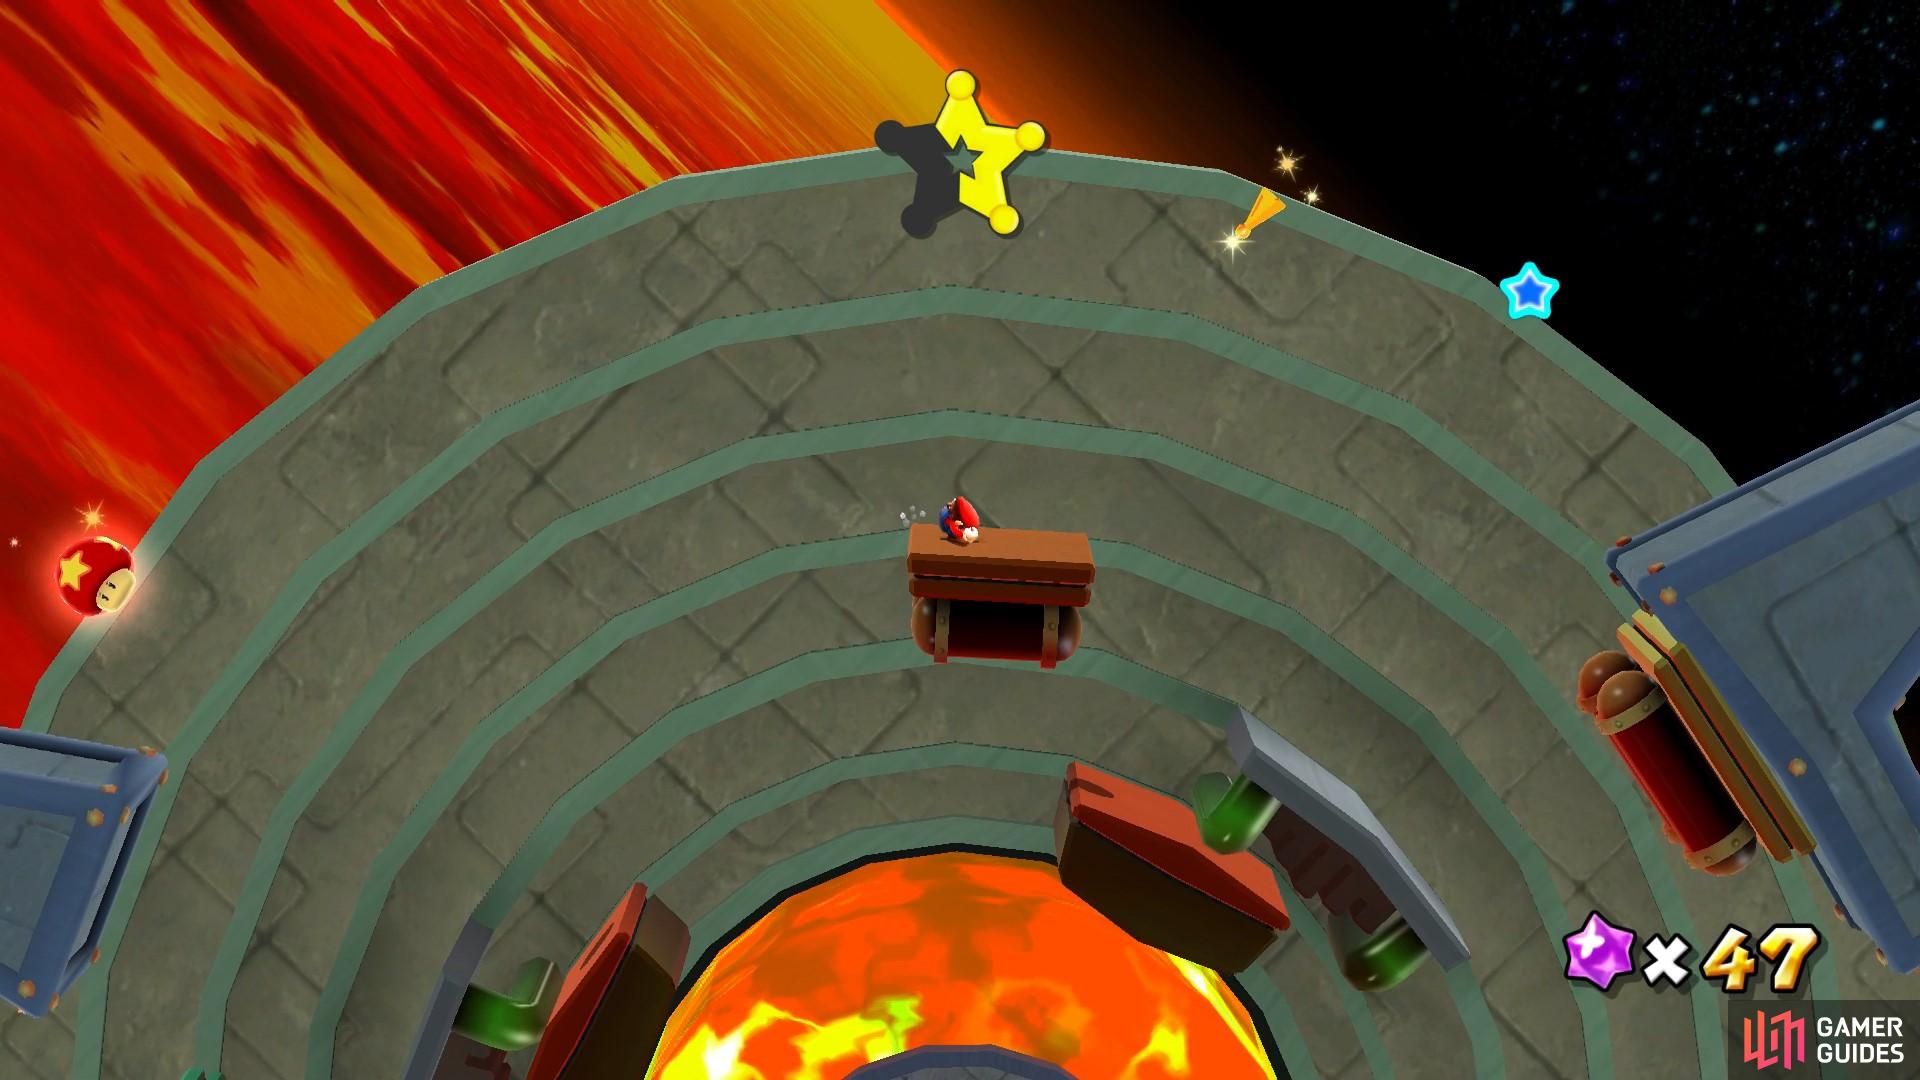 You’ll need to use the moving platforms to reach all of the Star Chips.